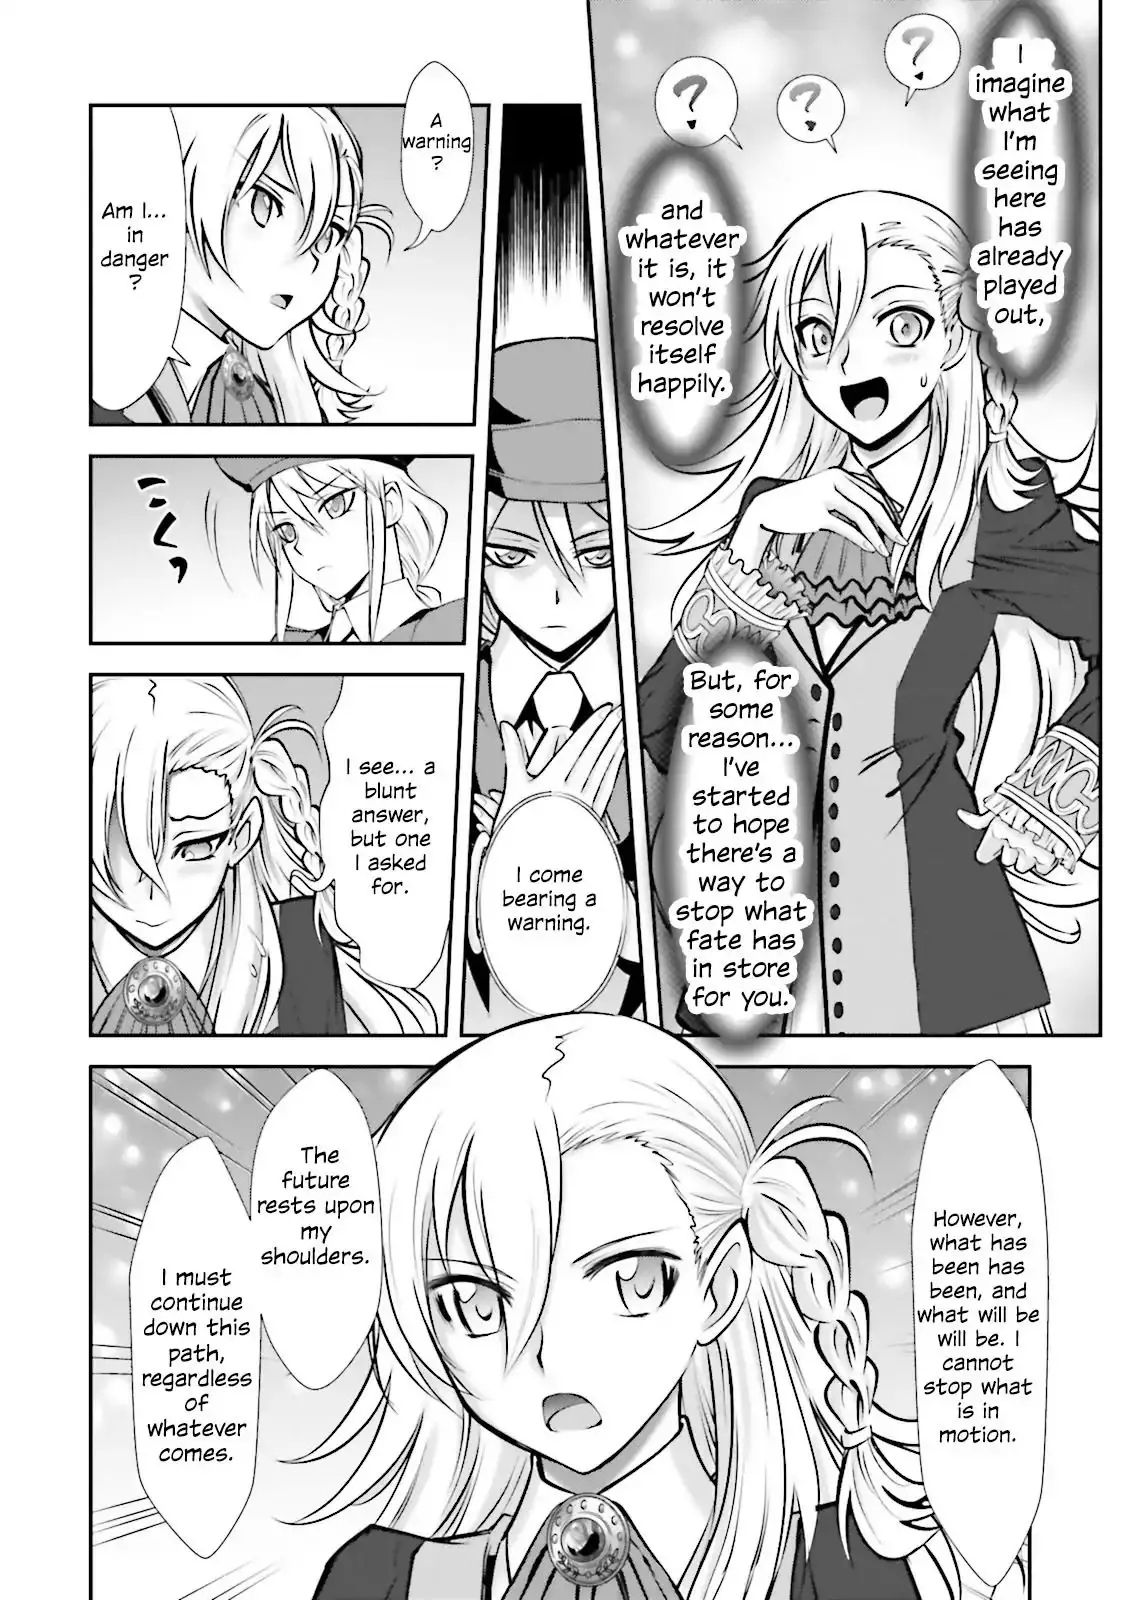 Melty Blood - Back Alley Alliance Nightmare - 5 page 18